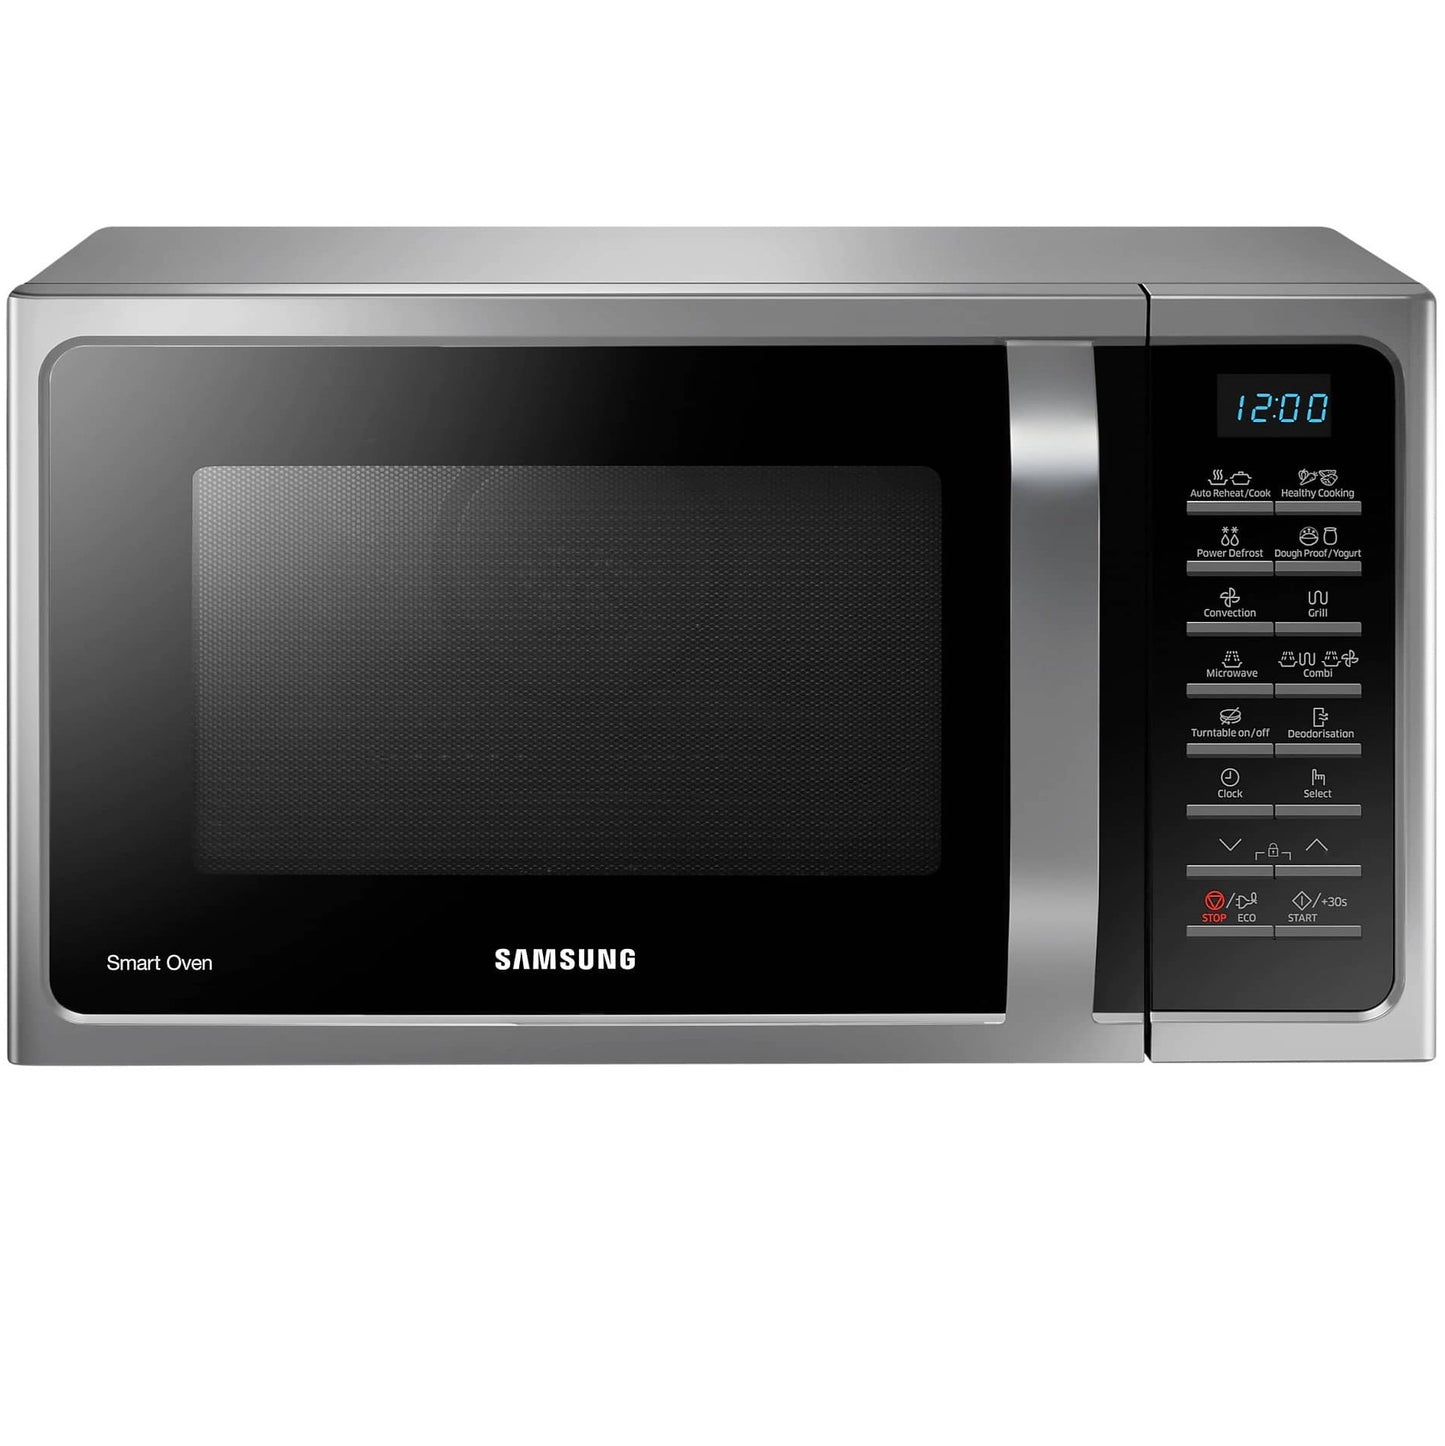 Samsung Microwave, Grill, Convection Oven 28Ltrs (MC28H5015AS)